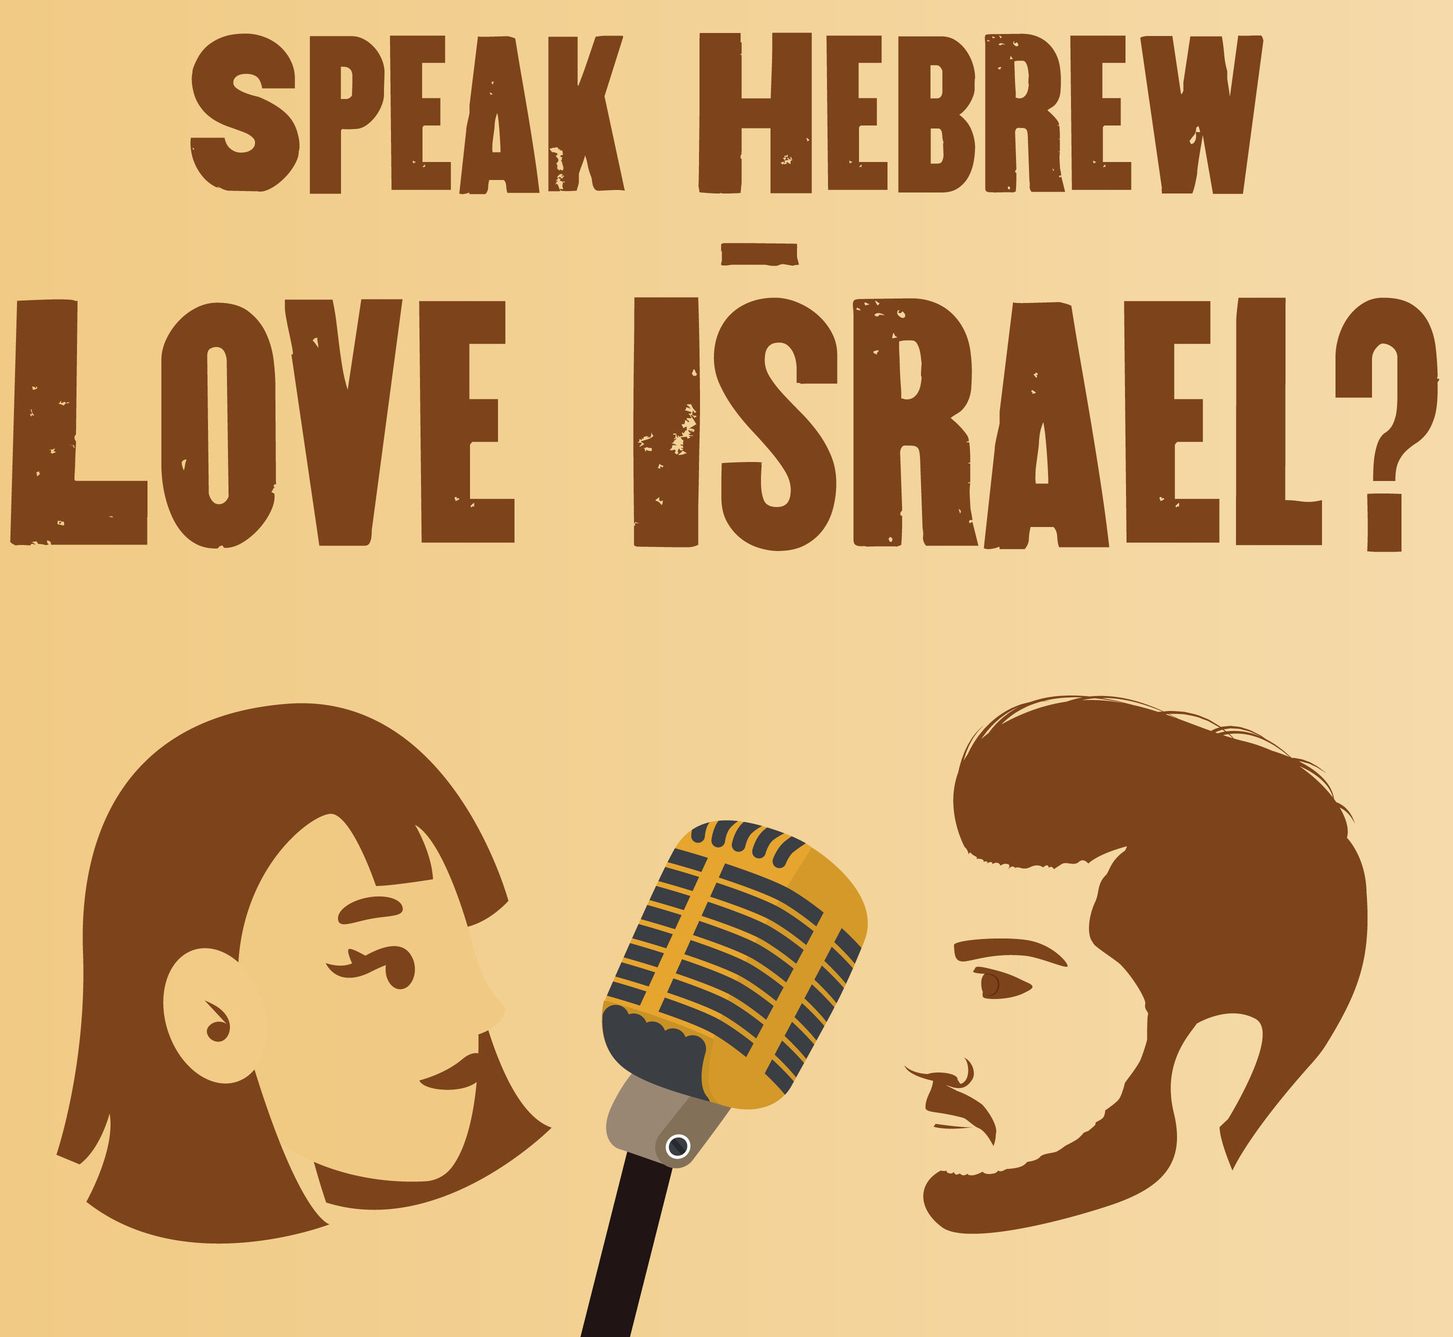 If you're interested in Hebrew, Israel and the Jewish world, you are invited to listen to my podcast<span style="font-weight: bold;"> 'Speak Hebrew - Love Israel?'</span> and reveal why do my students learn IVRIT?